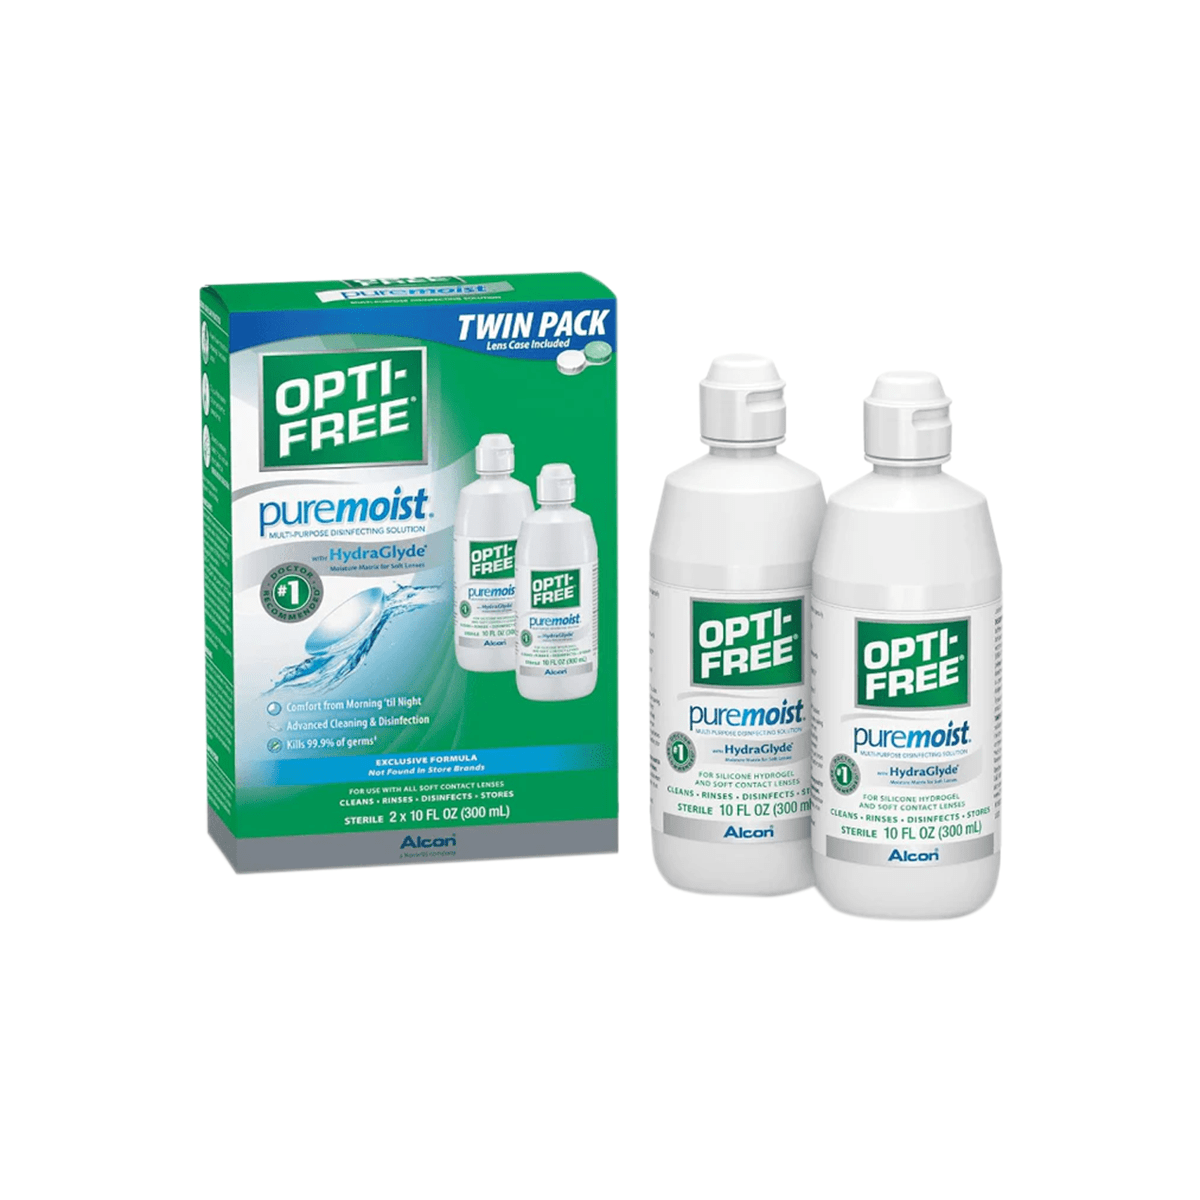 Opti - Free Puremoist Multi - Purpose Disinfecting Solution with Lens Case, 20 Fl Oz (pack of 2) - Dryeye Rescue